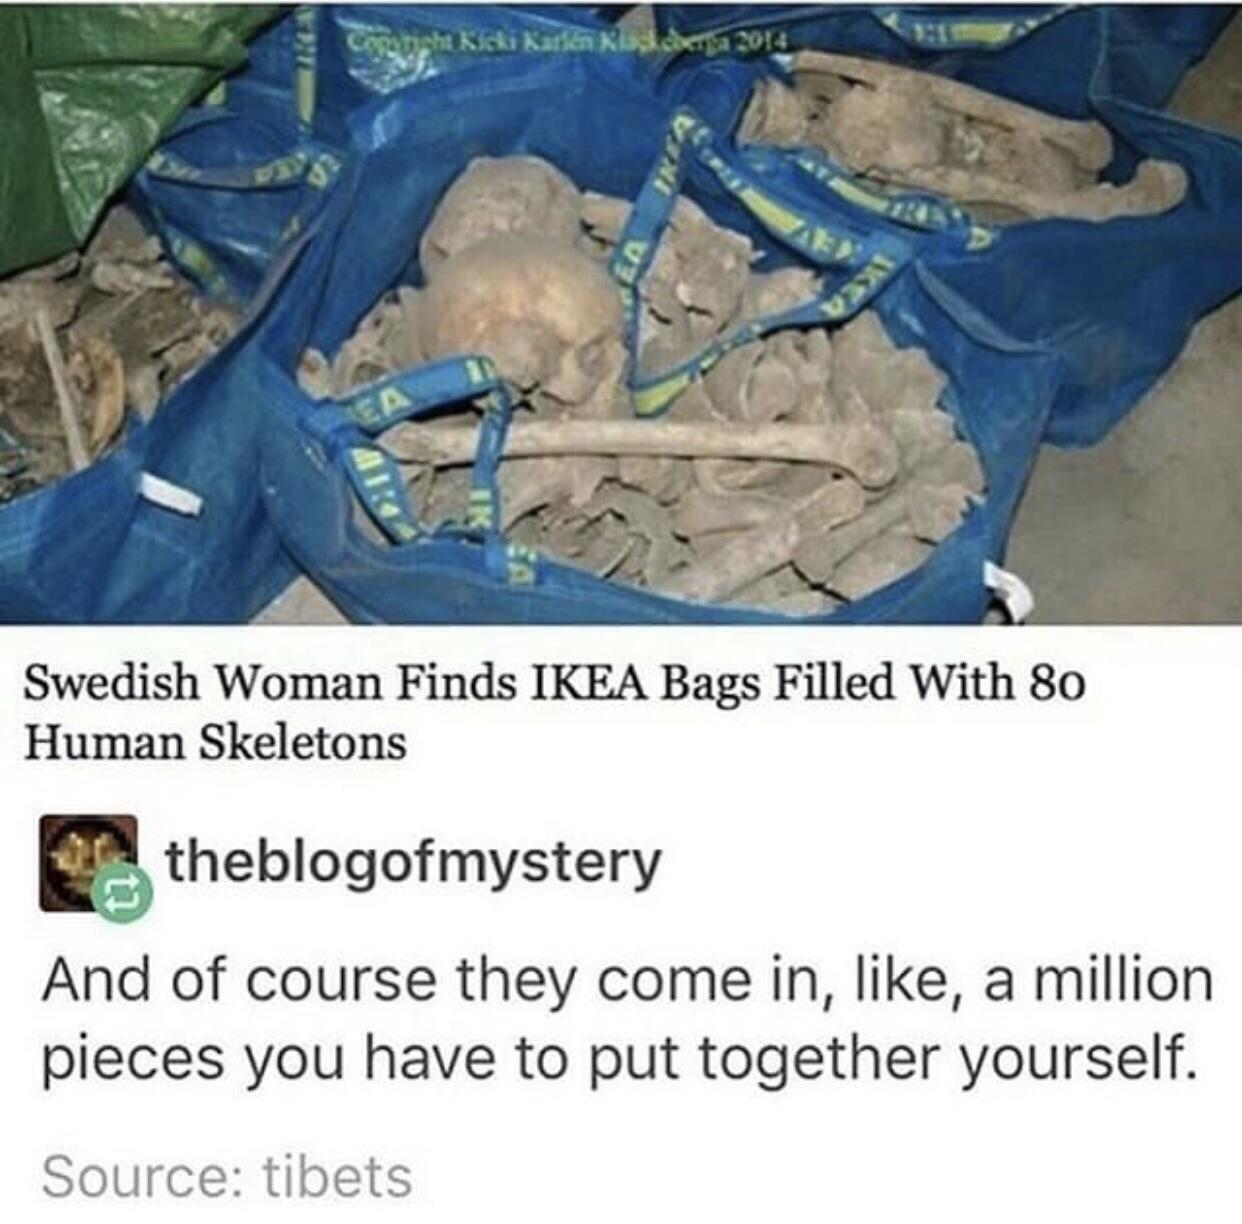 ikea bones meme - Katinka.com 2014 Swedish Woman Finds Ikea Bags Filled With 80 Human Skeletons theblogofmystery And of course they come in, , a million pieces you have to put together yourself. Source tibets